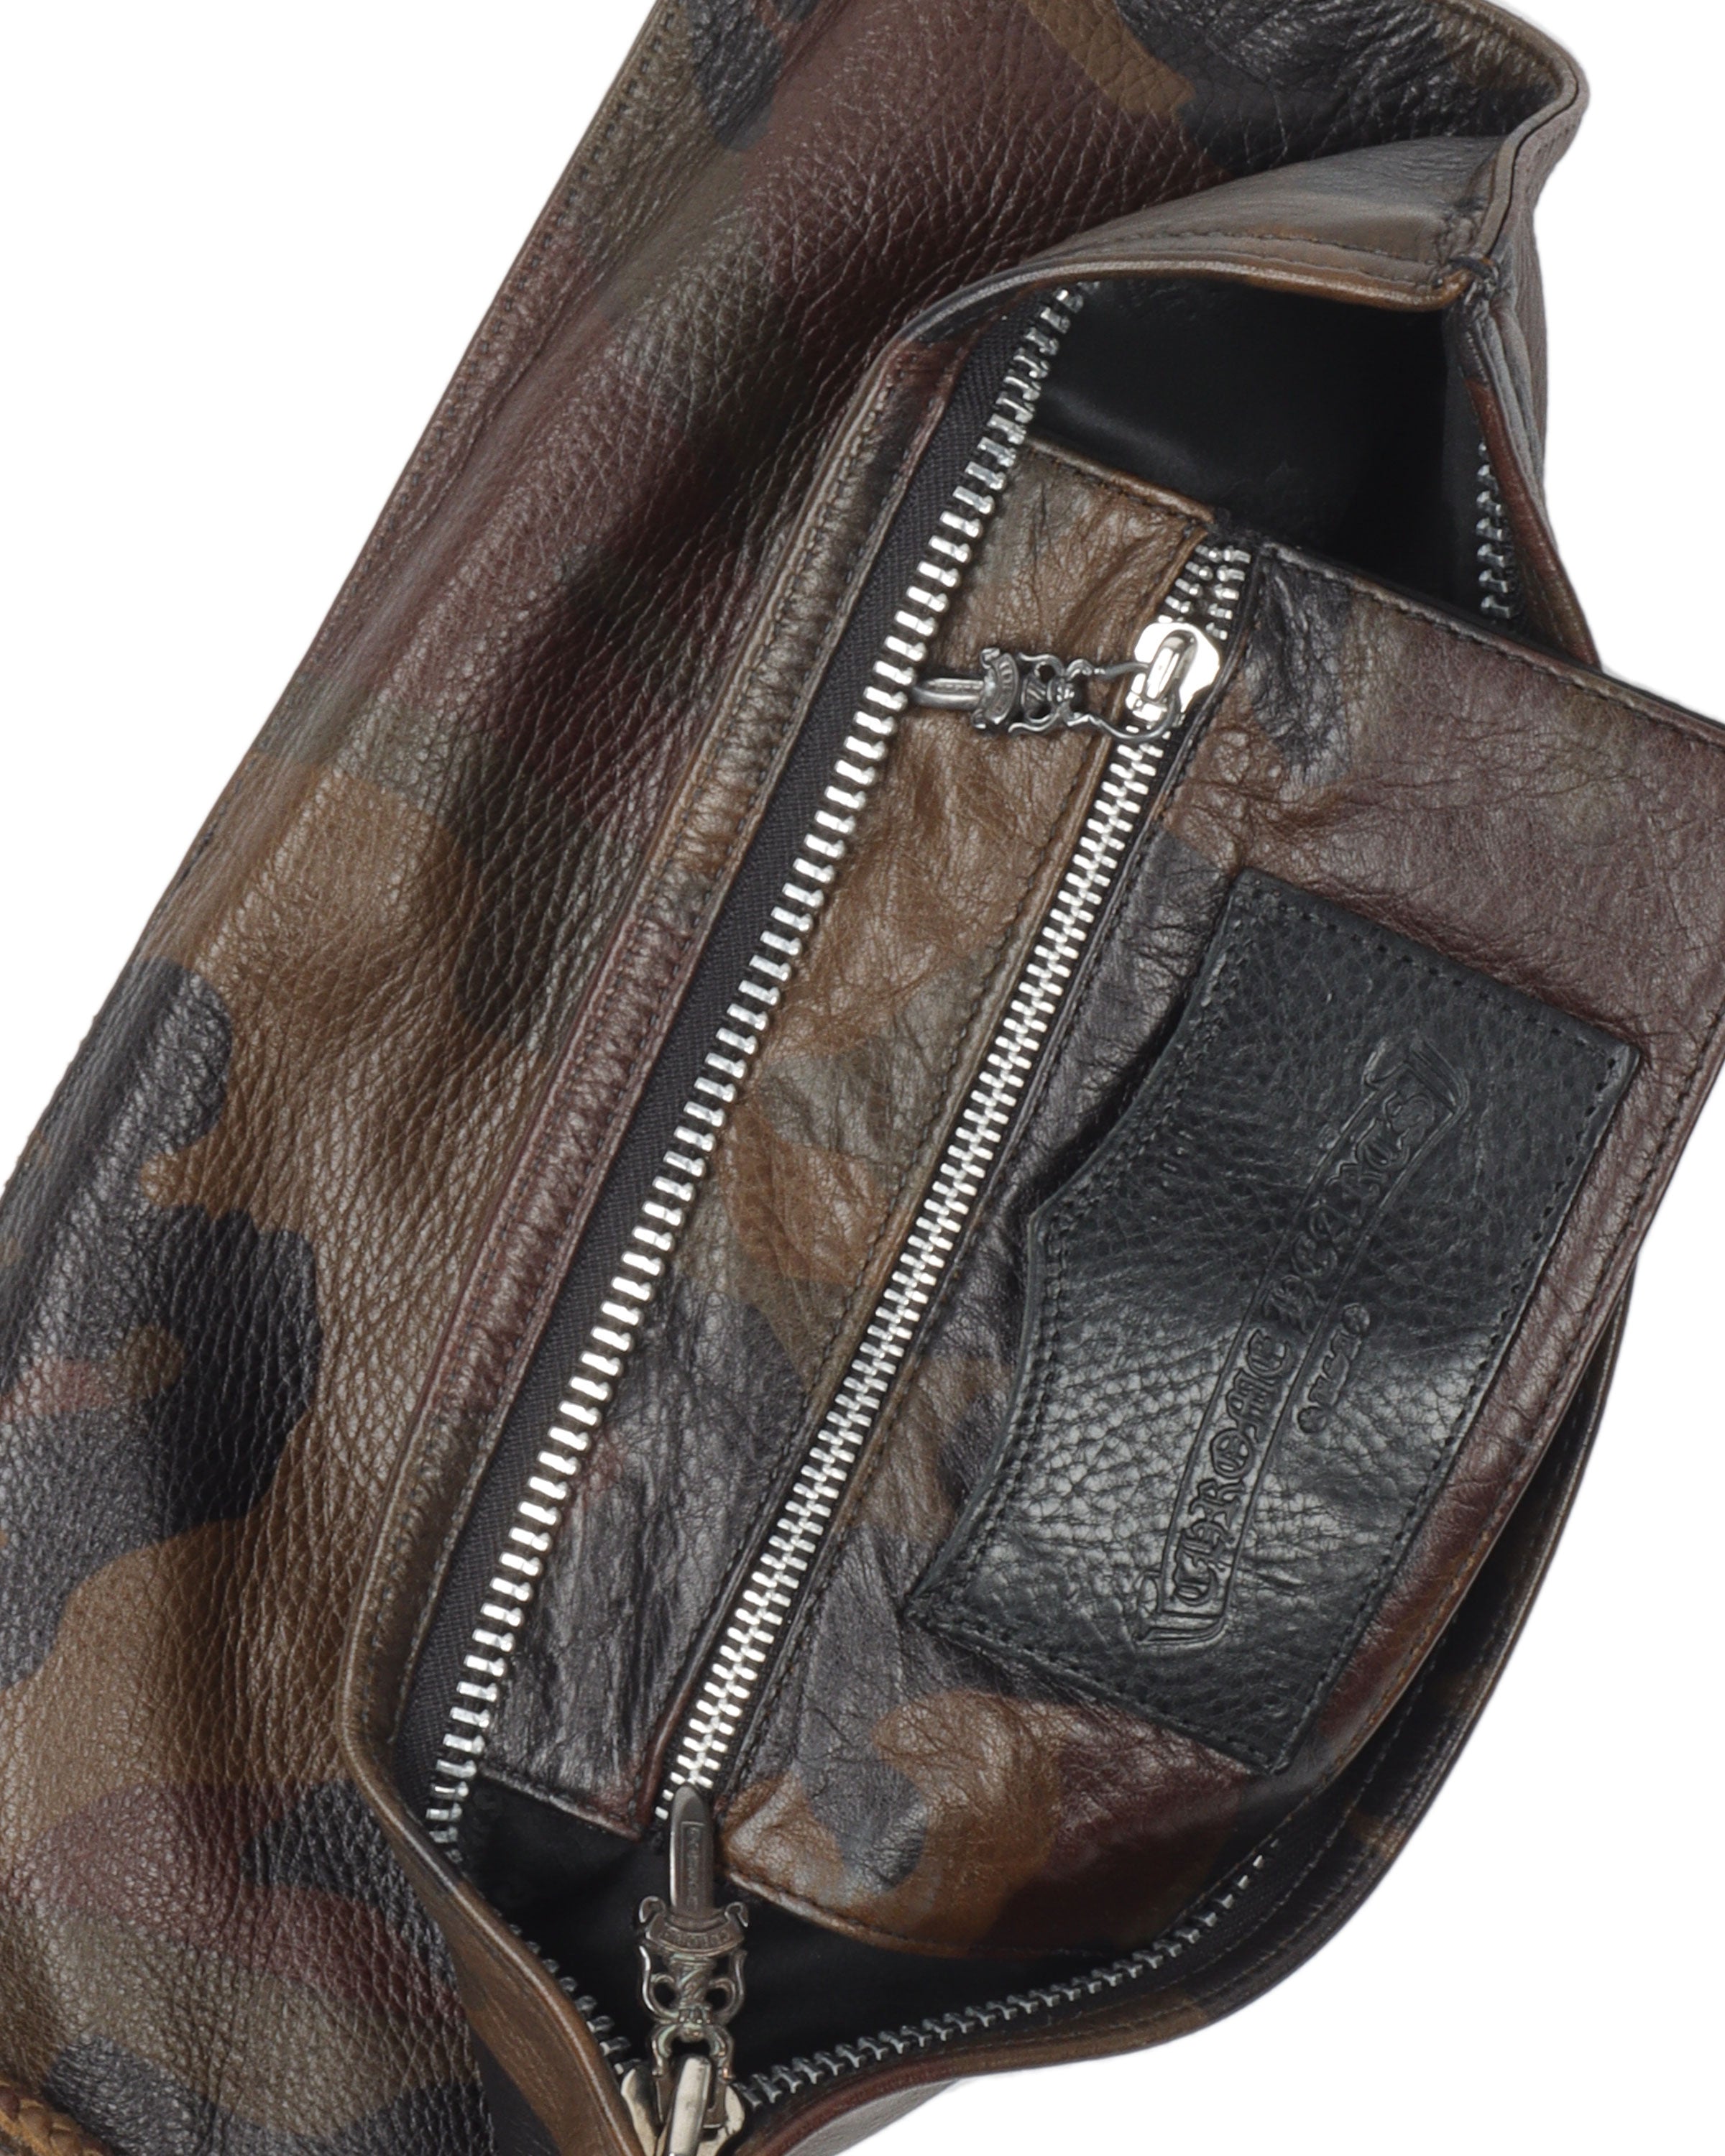 "Fleur" Camouflage Leather Pouch